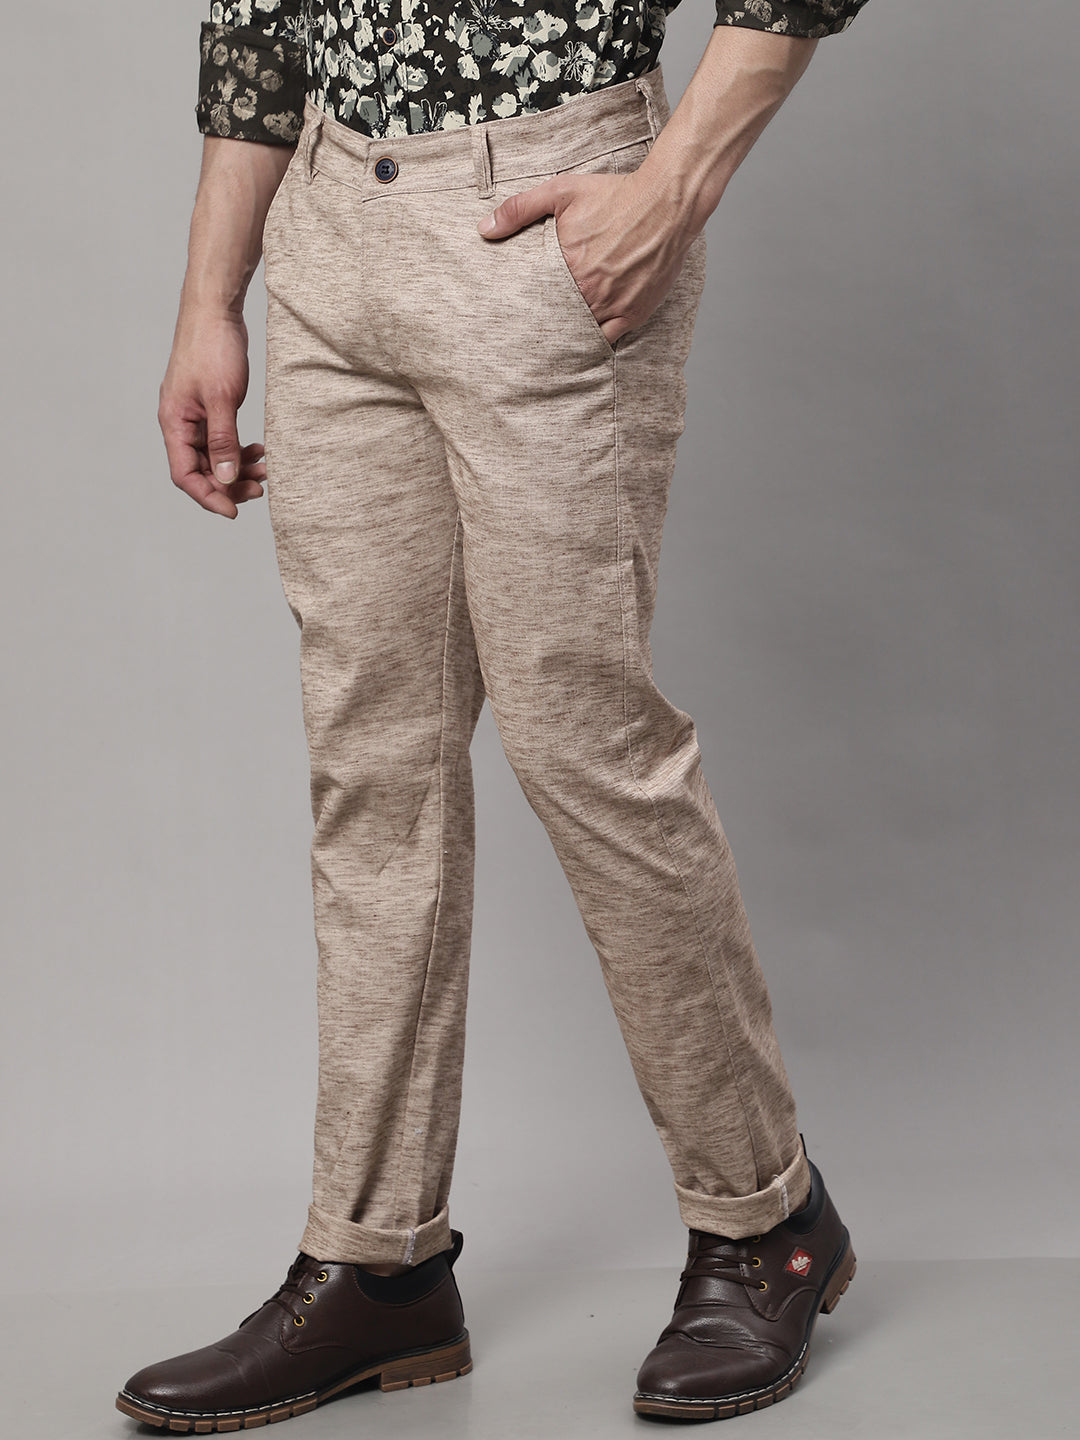 Majestic Man Regular Fit Pattern Finish Cotton Casual Solid Chinos Trouser - Brown